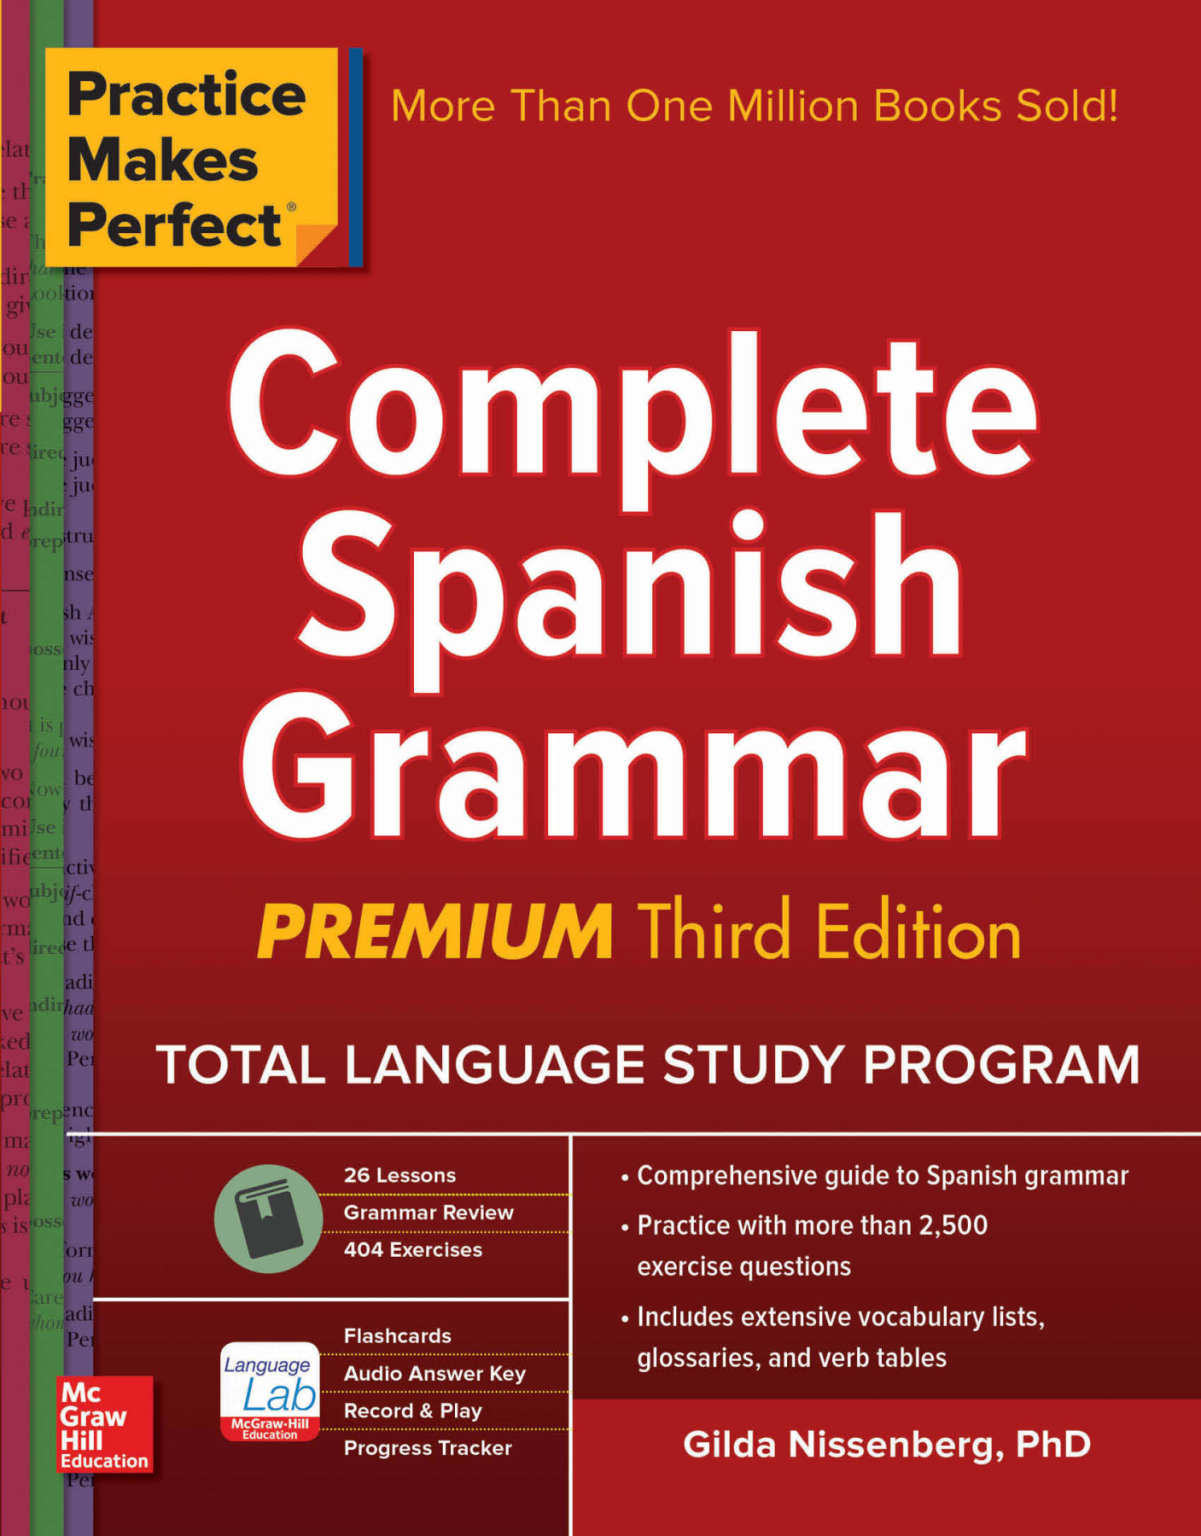 Rich results on Google's SERP when searching for ''Practice-Makes-Perfect-Complete-Spanish-Grammar-Book''